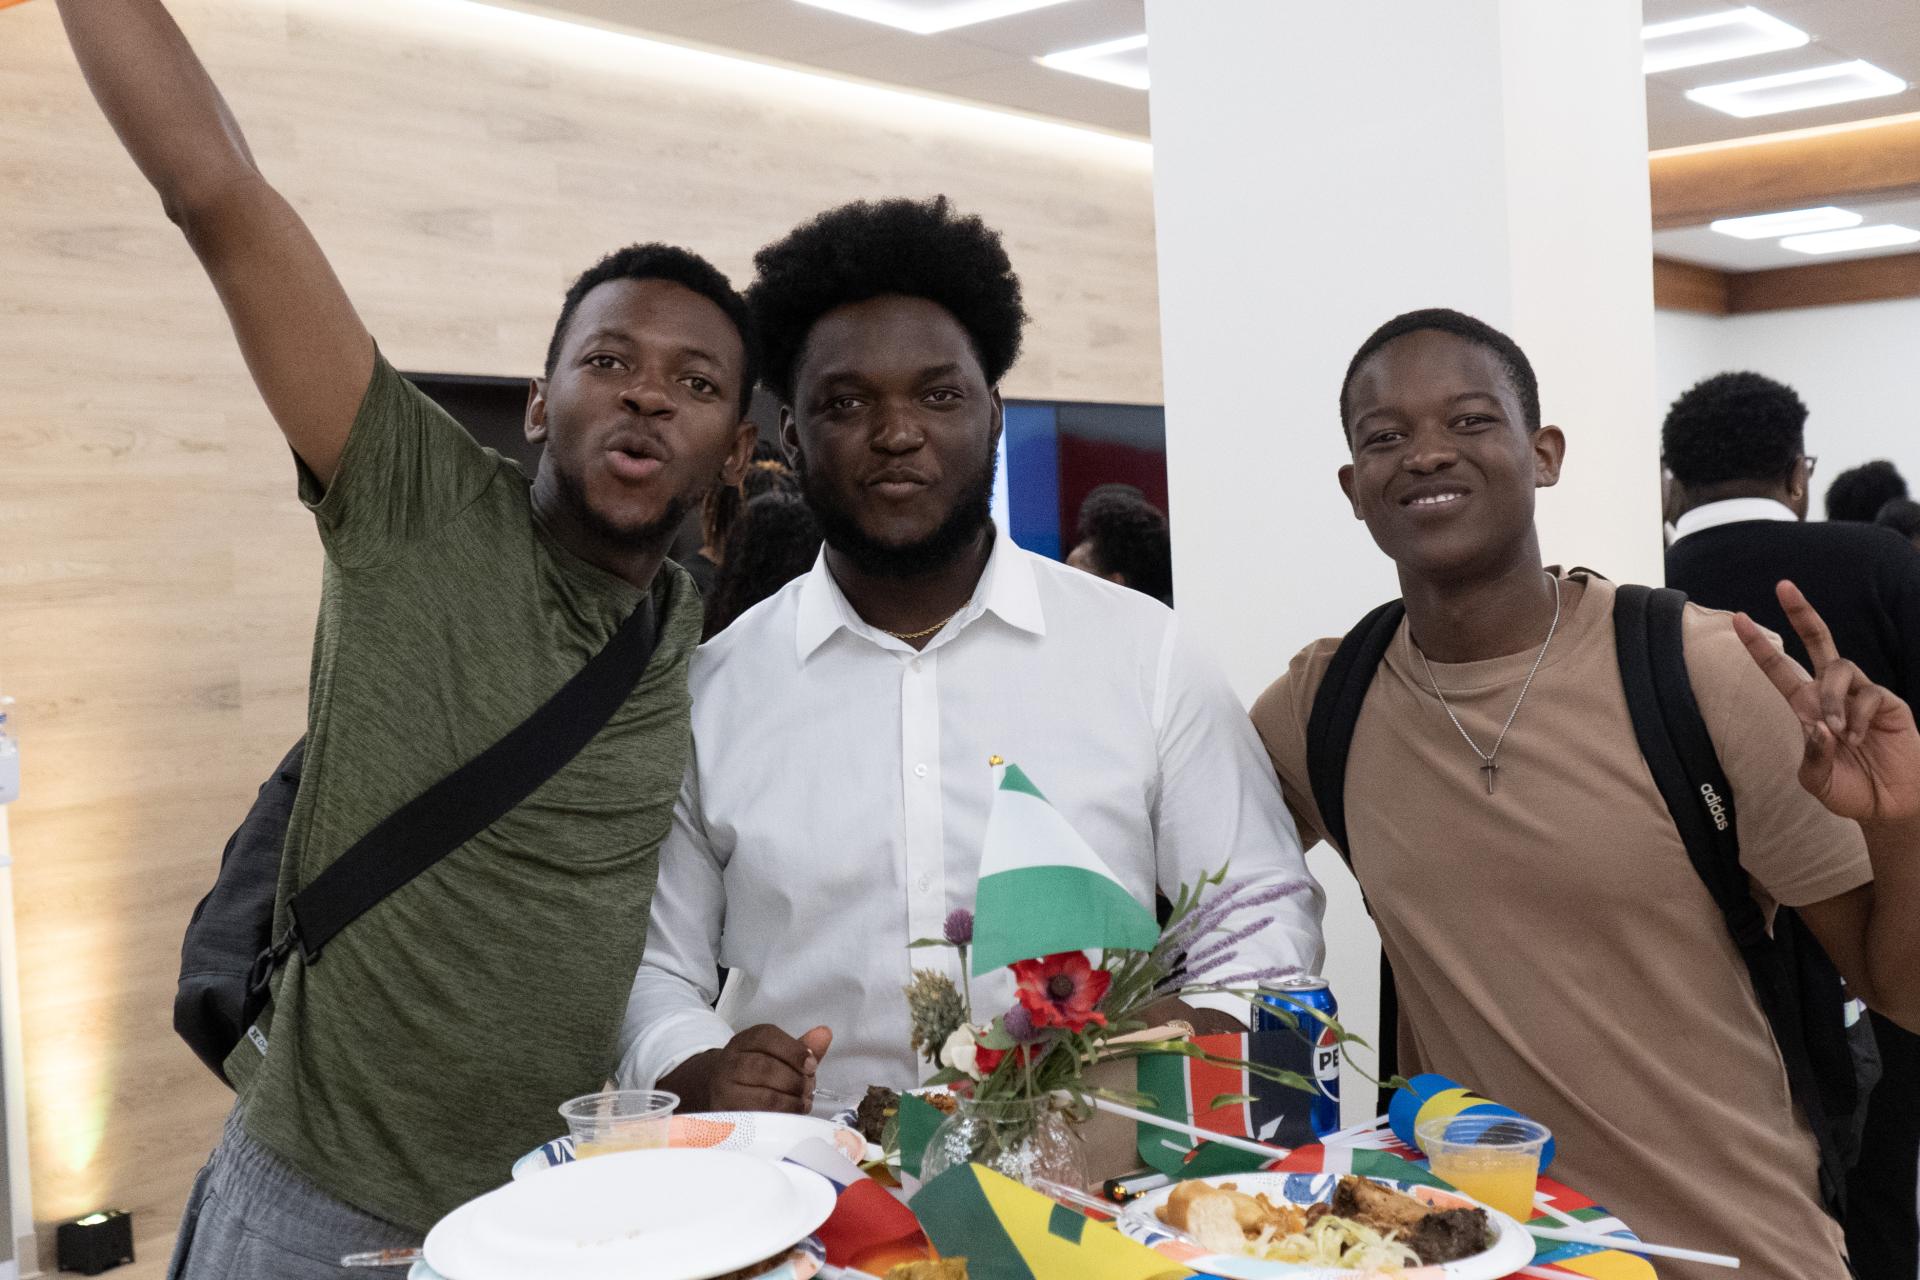 Howard's international student body enjoy refreshments served at the International Graduation Ceremony, where over 15 countries were represented through more than 30 graduates. (Photo by Rohan Beckford)